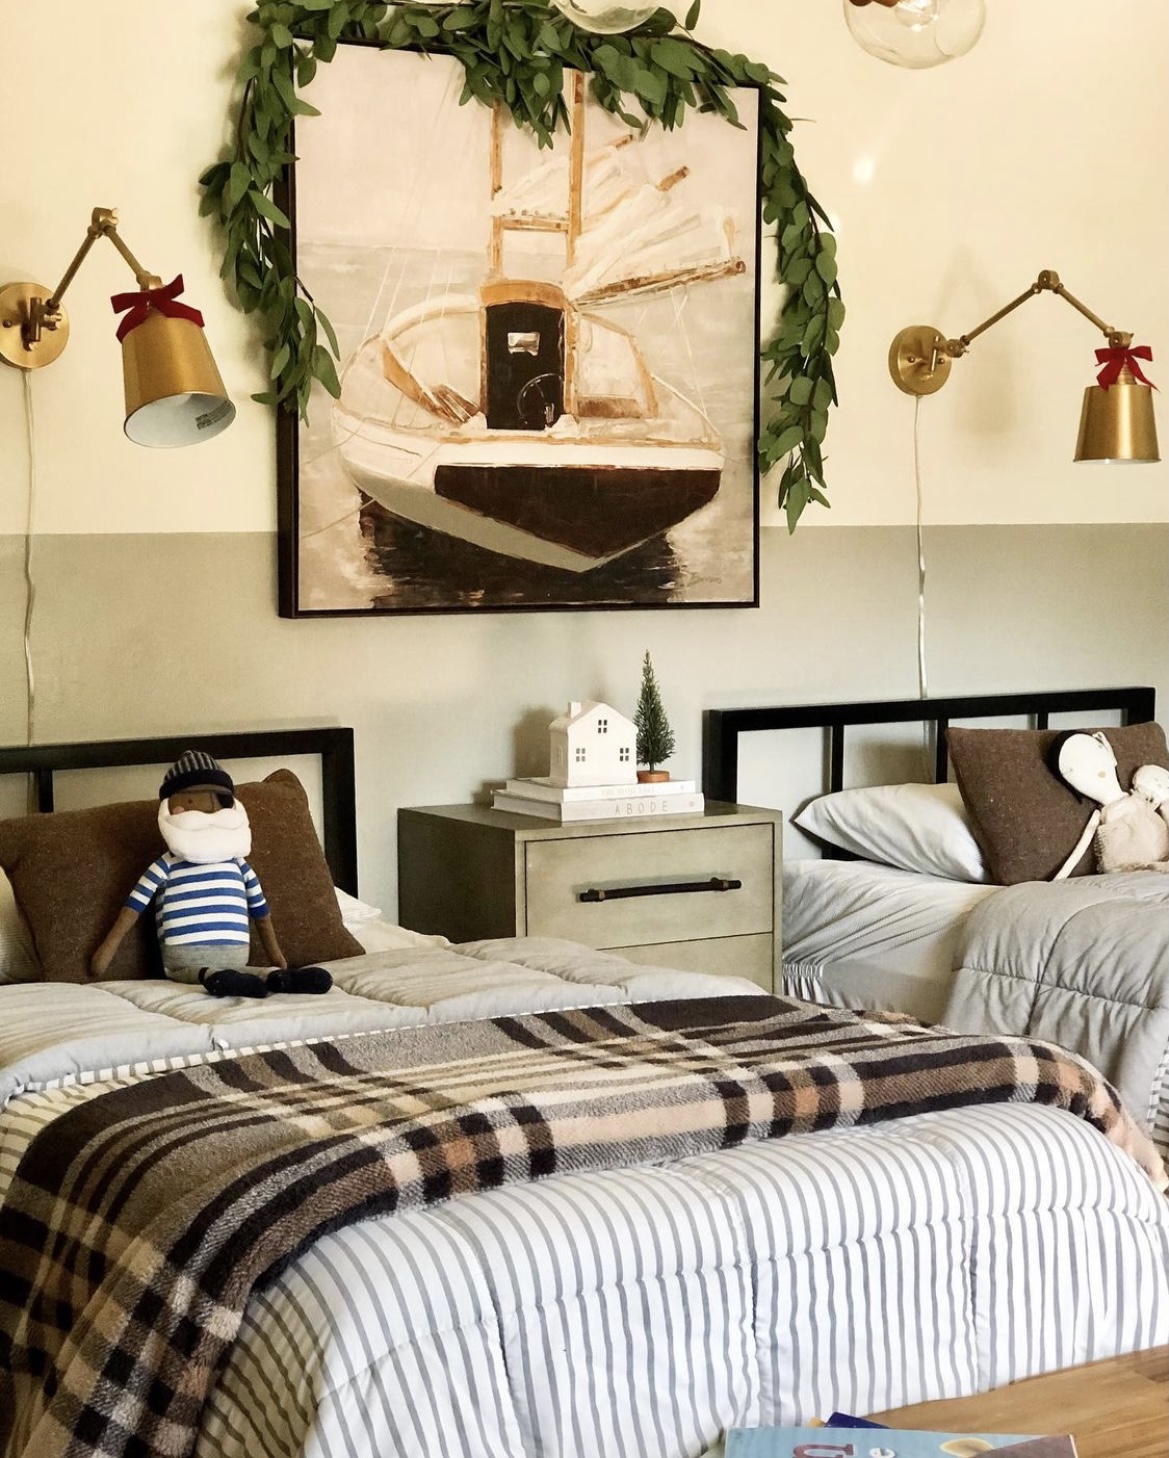 shared kids' bedroom, shared sibling bedroom, shared kid's room, two twin kids, swing arm sconce, swing arm sconce over bed, sconce over bed, nautical art, nautical kids room, kids room ideas, kids bedroom inspiration, kids bedroom design, art between two kids, rooms with two kids, striped bedding, bed styling in kids rooms, bench end of bed, half painted room, greige paint, swiss coffee dun edards paint